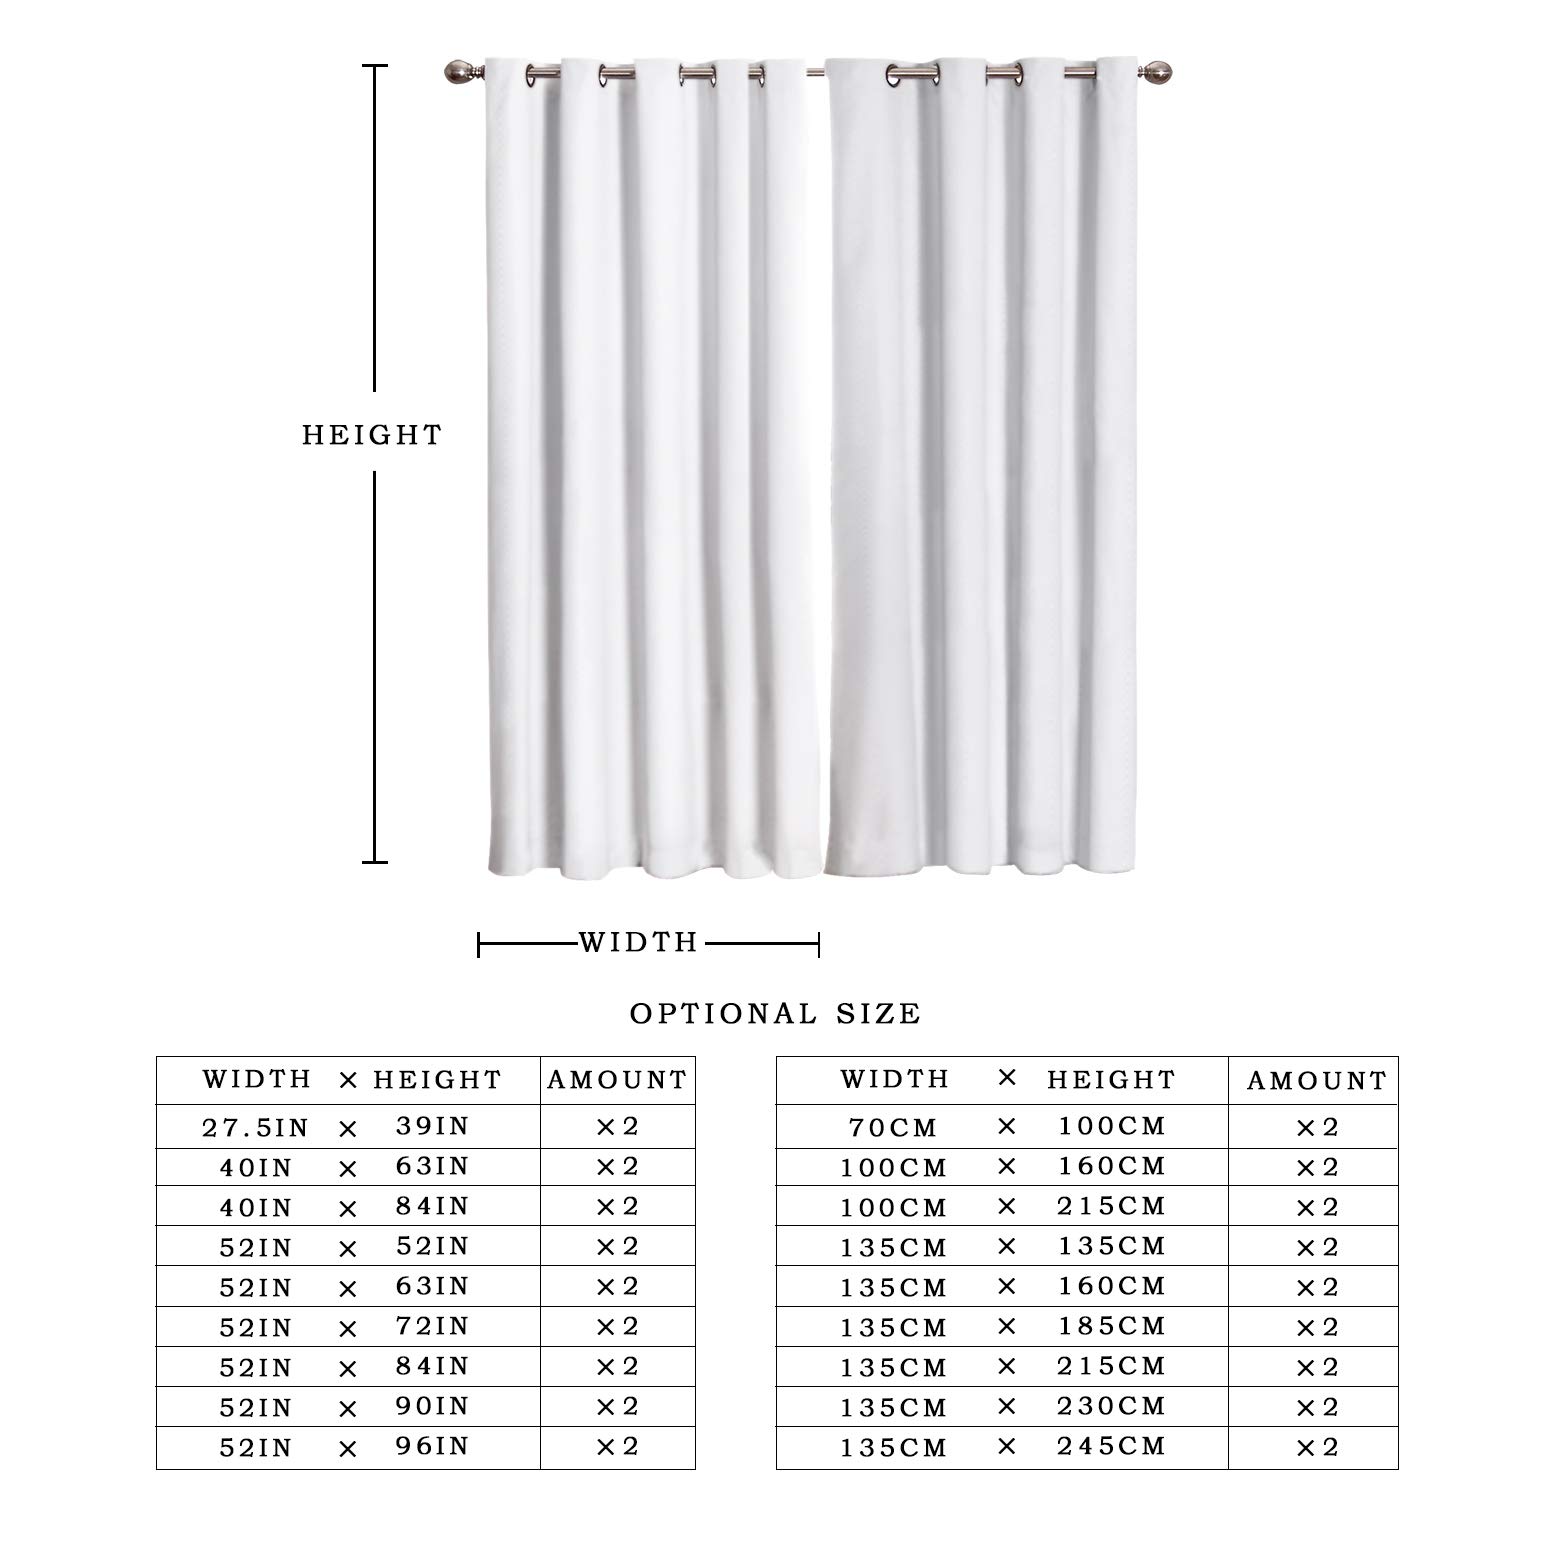 BABE MAPS Customized Window Curtains Panel 84 inch Length 2 Panels Modern Window Treatment Drapes for Bedroom Living Room - Vertical Stripes Black White Red Grey